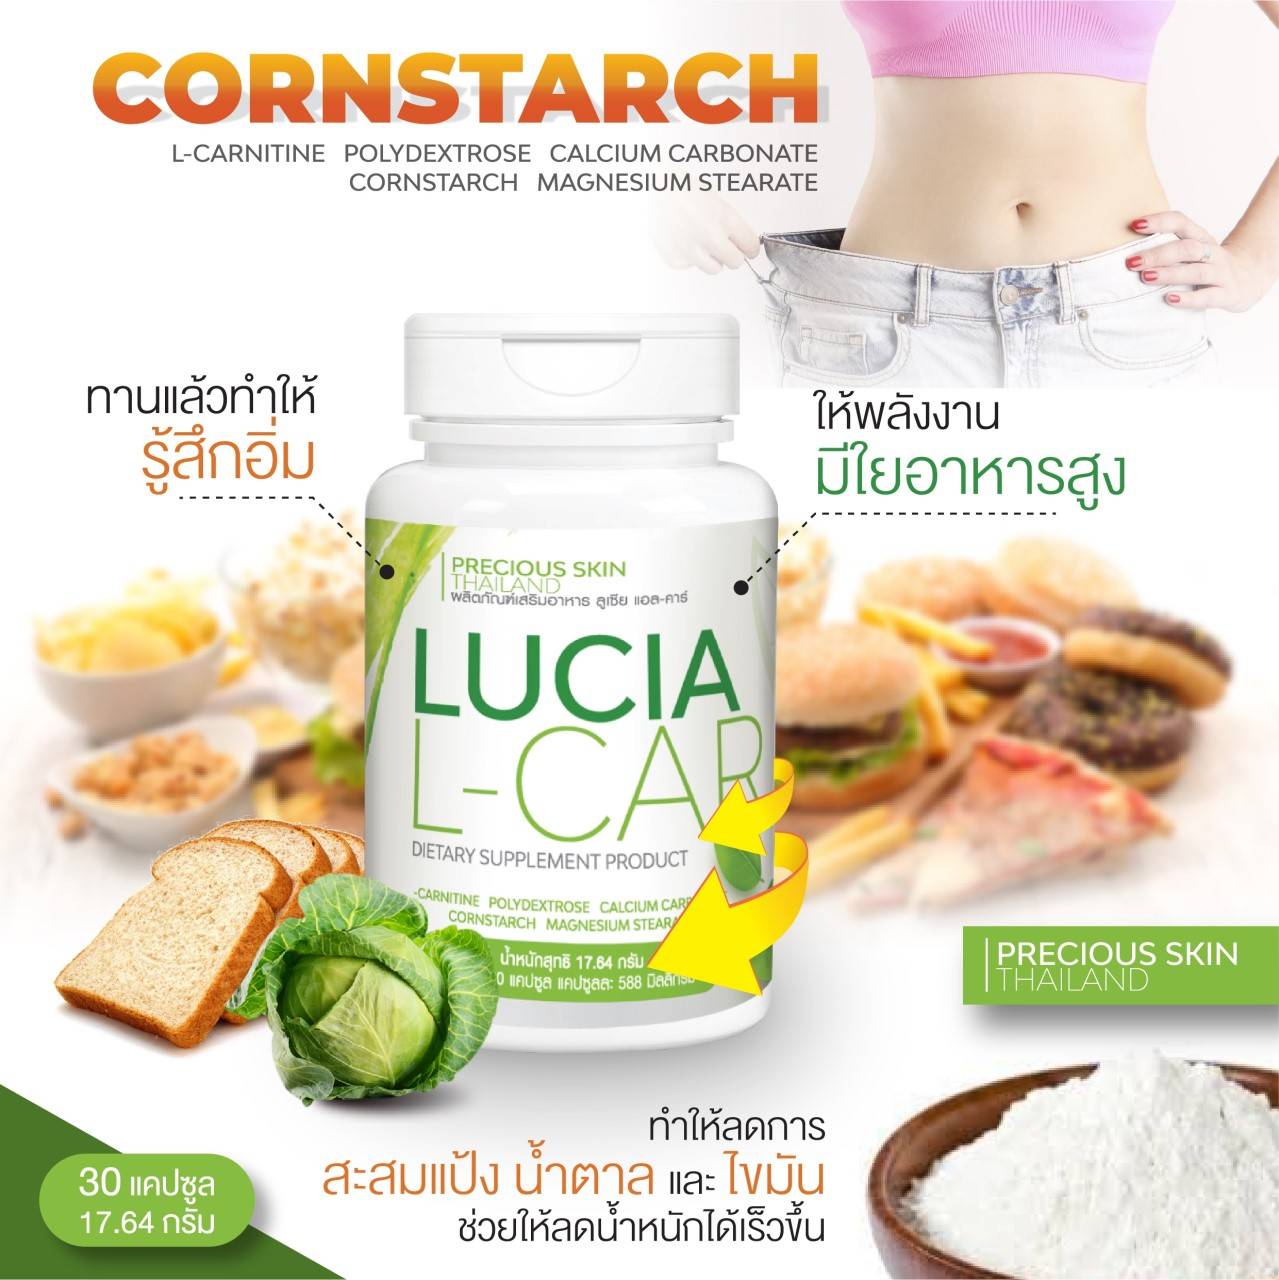 LUCIA L-CAR (30 CAPSULES) LUCIA L-CARNITINE FIT FIRM AND SLIM LOSE WEIGHT POLYDEXTROSE by "www.ccthaitown.com"